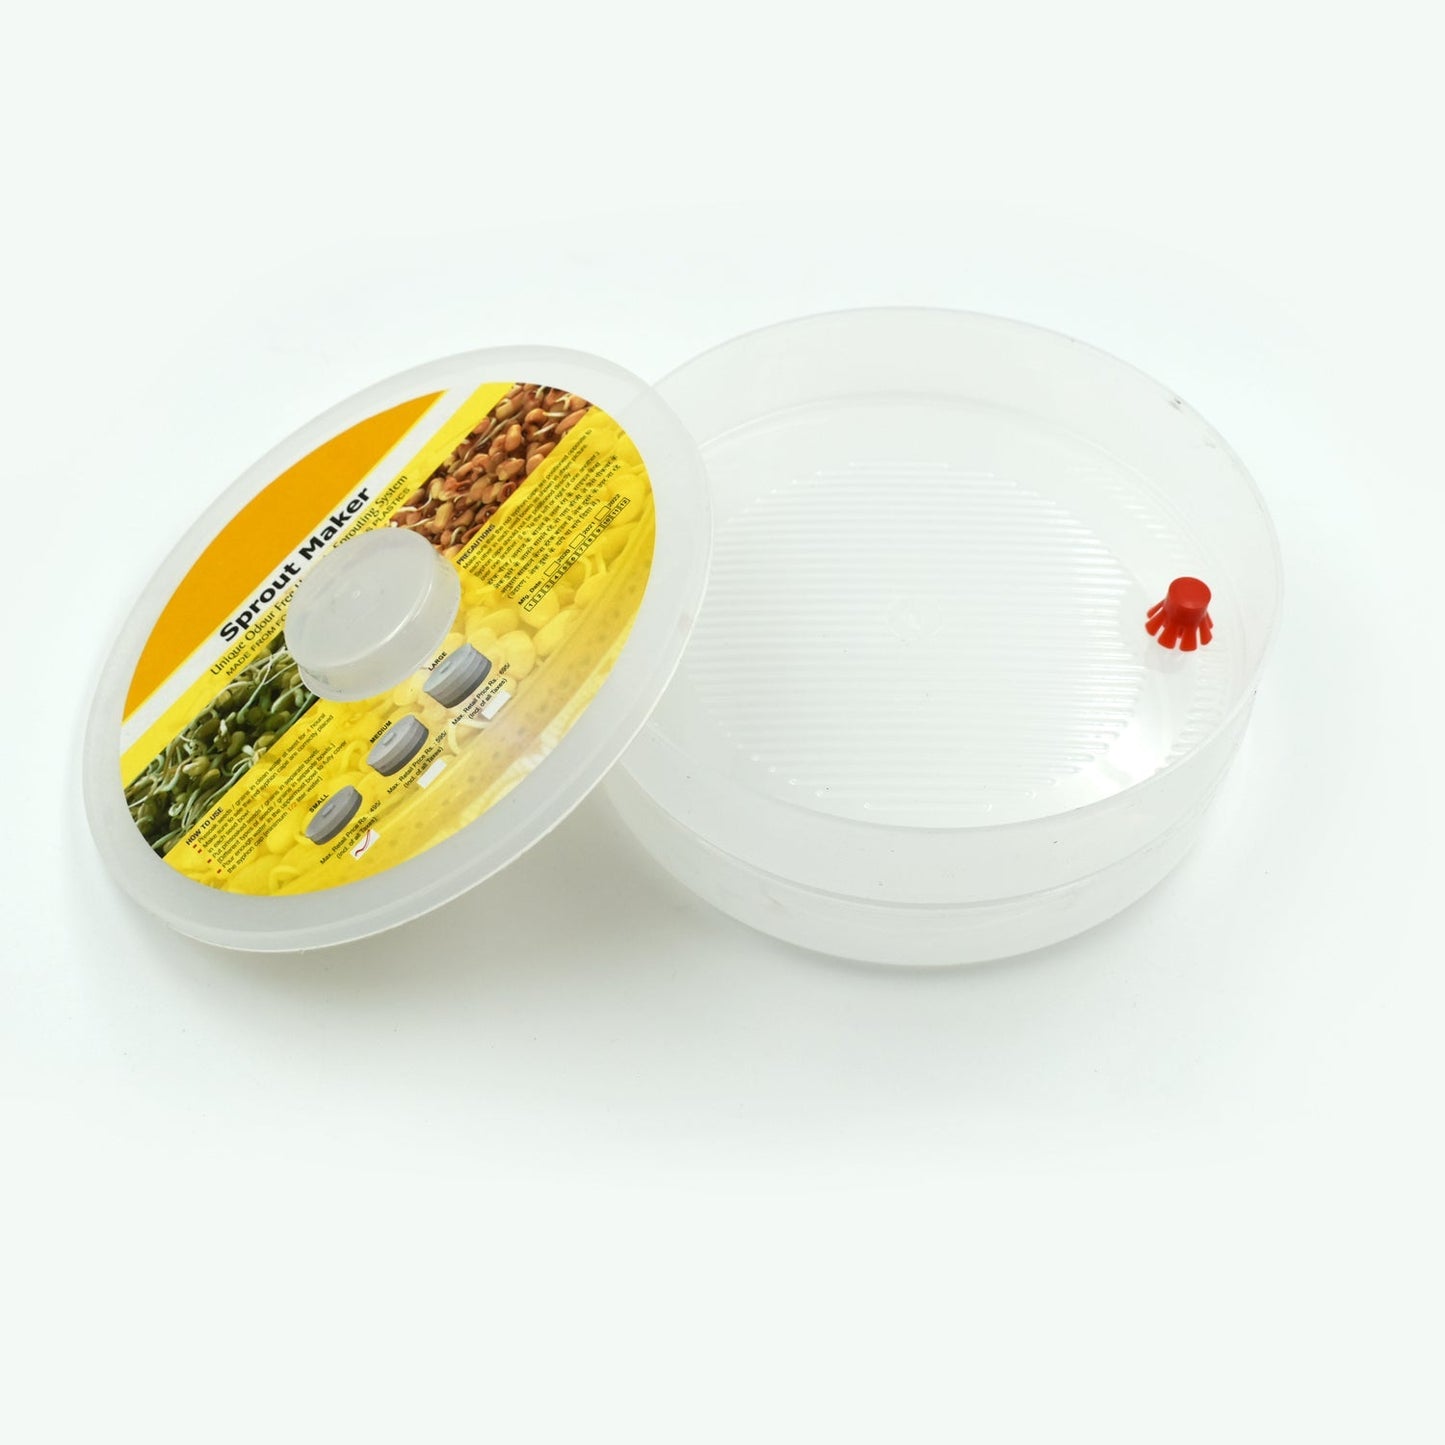 2648A 2 Layer Sprout Maker for making sprouts in all household places.